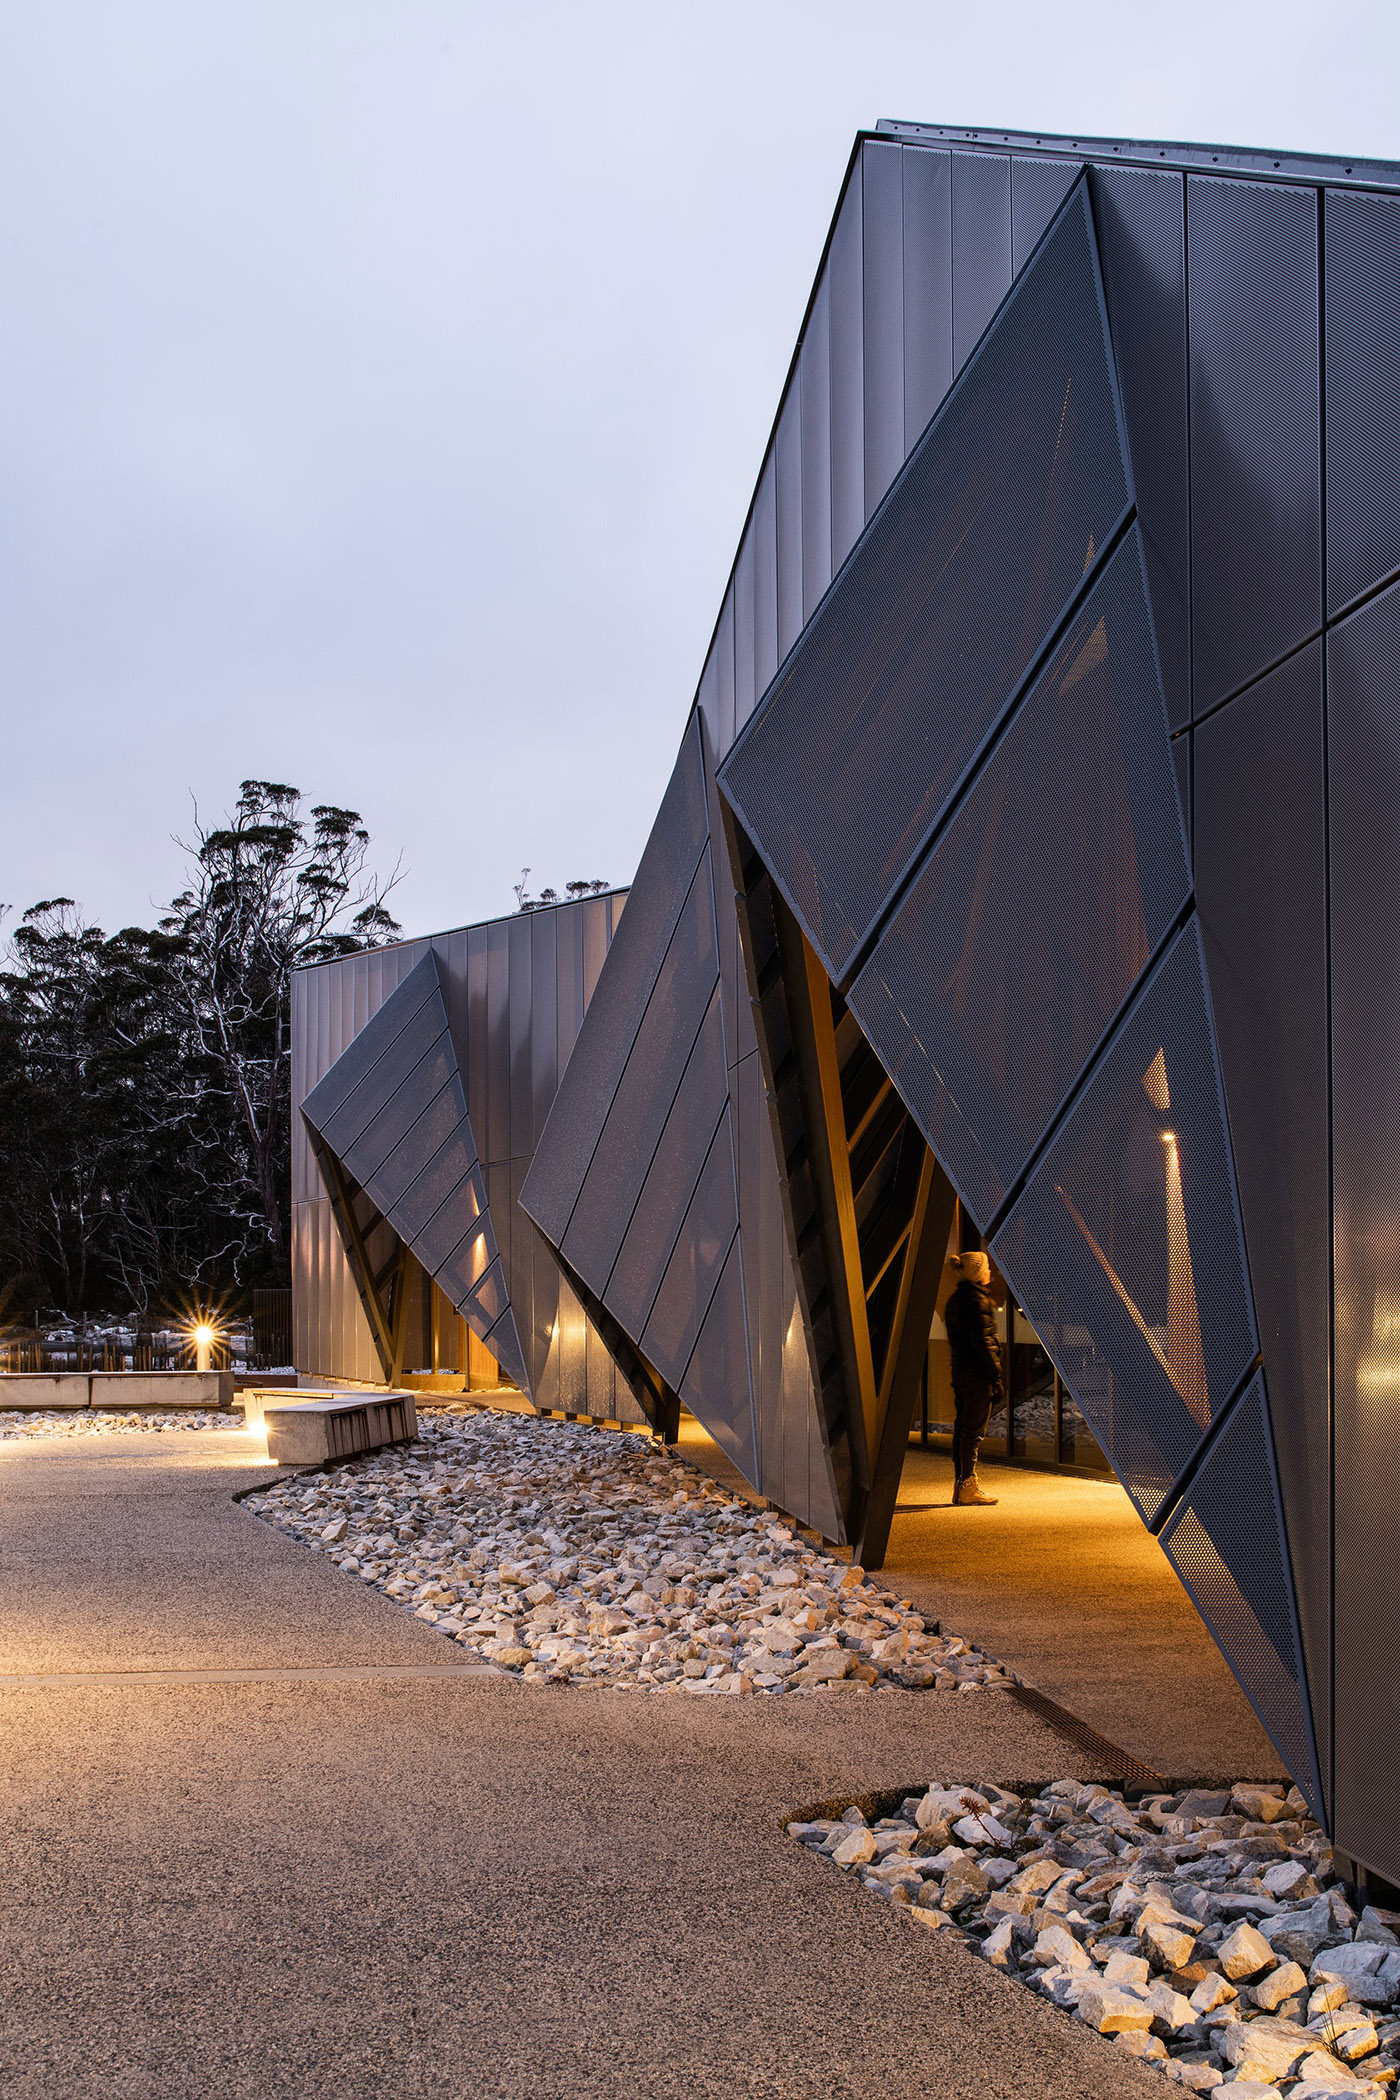 Cradle Mountain Visitor Centre, inspired by the protective Tasmanian eucalyptus tree crown, brings the world-class park of global naturalistic significance to prominence